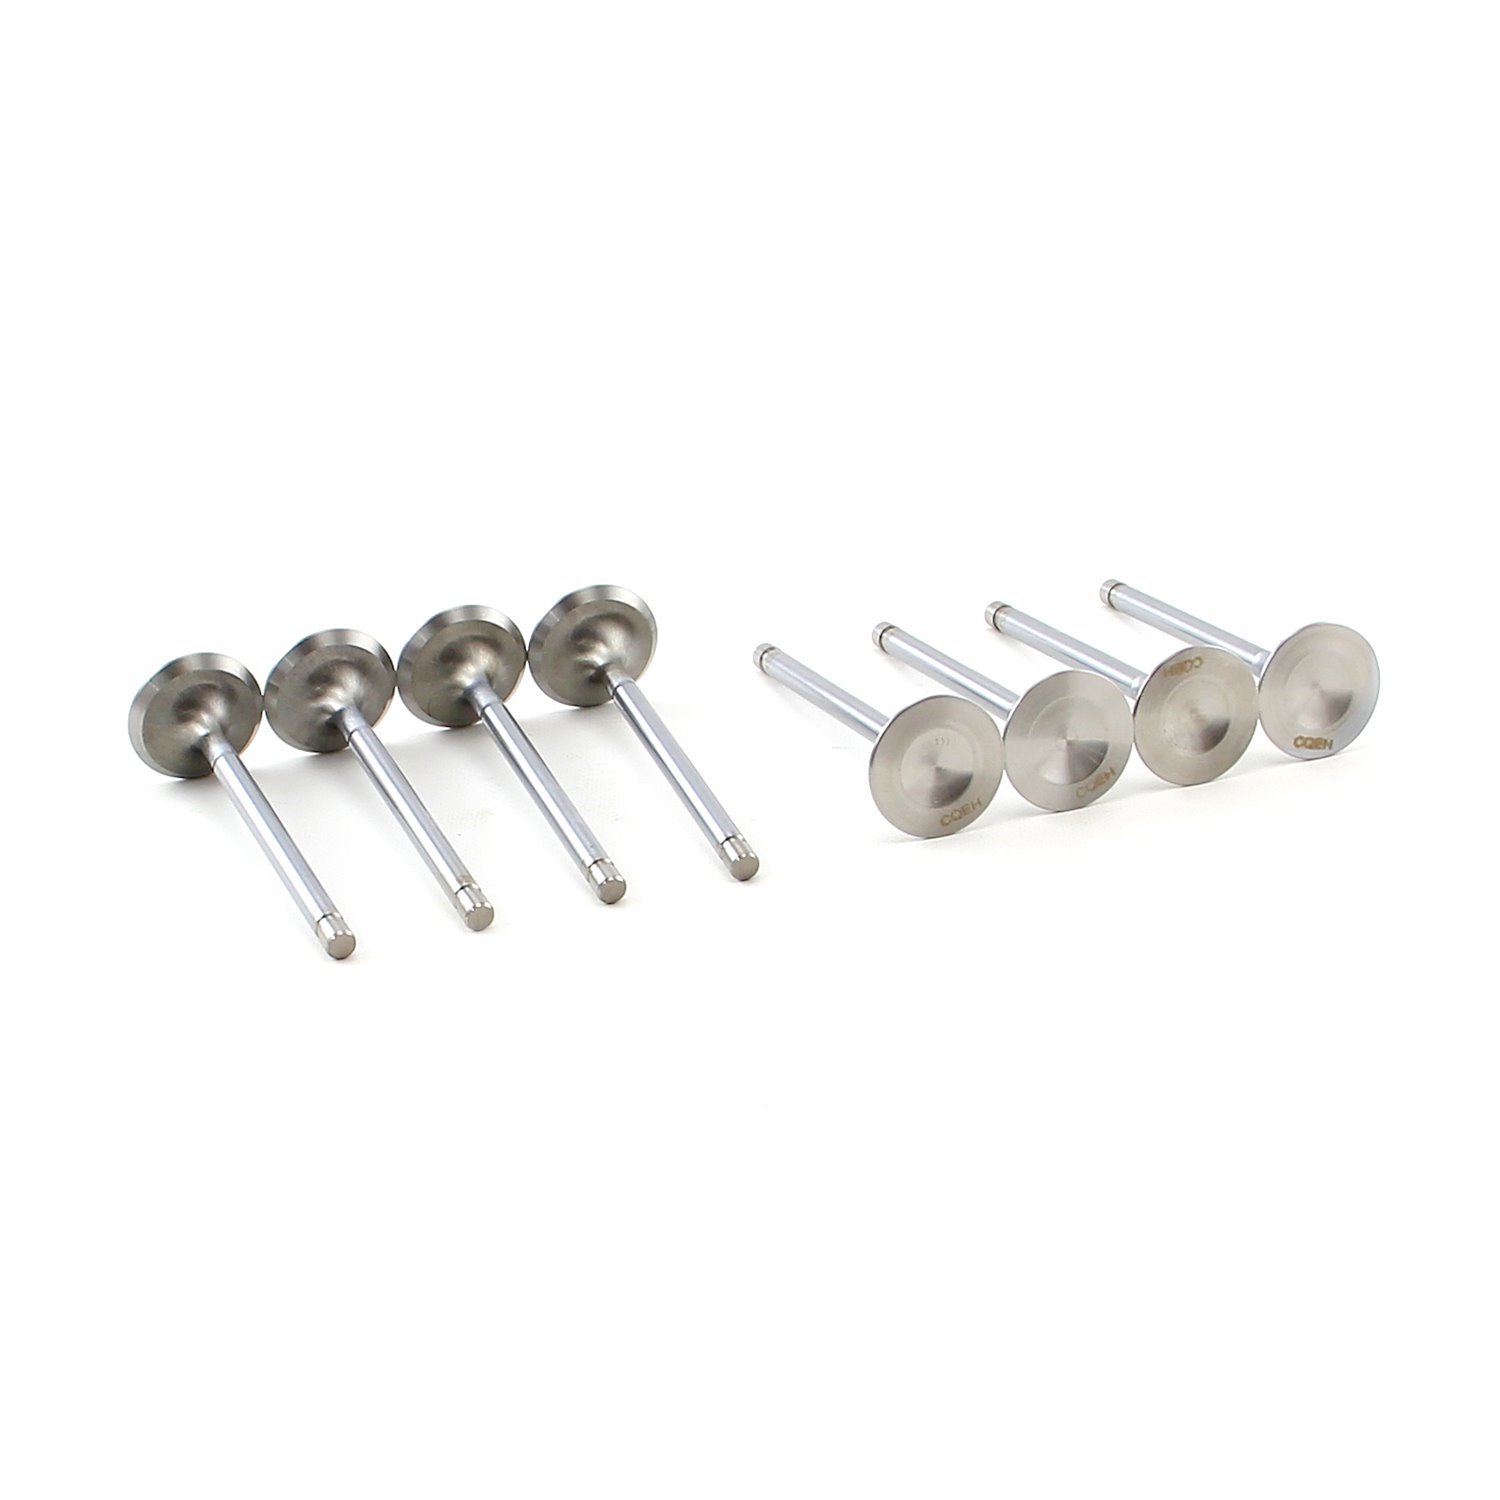 Chevy SBC 350 1.600 +Std 11/32 Stainless Steel Exhaust Valves Set 8Pcs